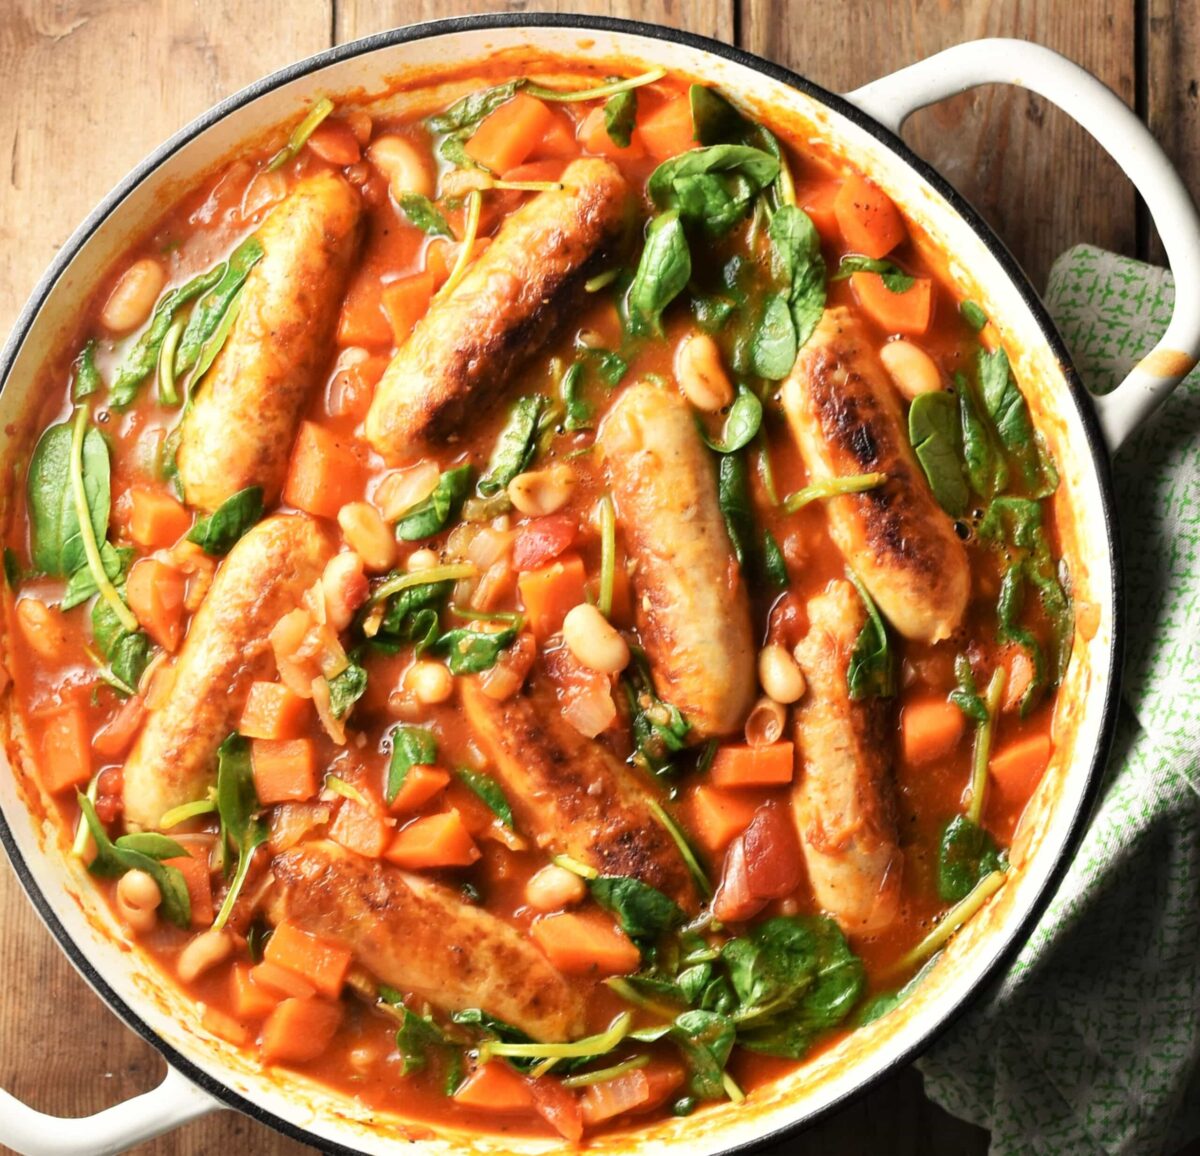 Beans and sausages with vegetables in large shallow white dish.